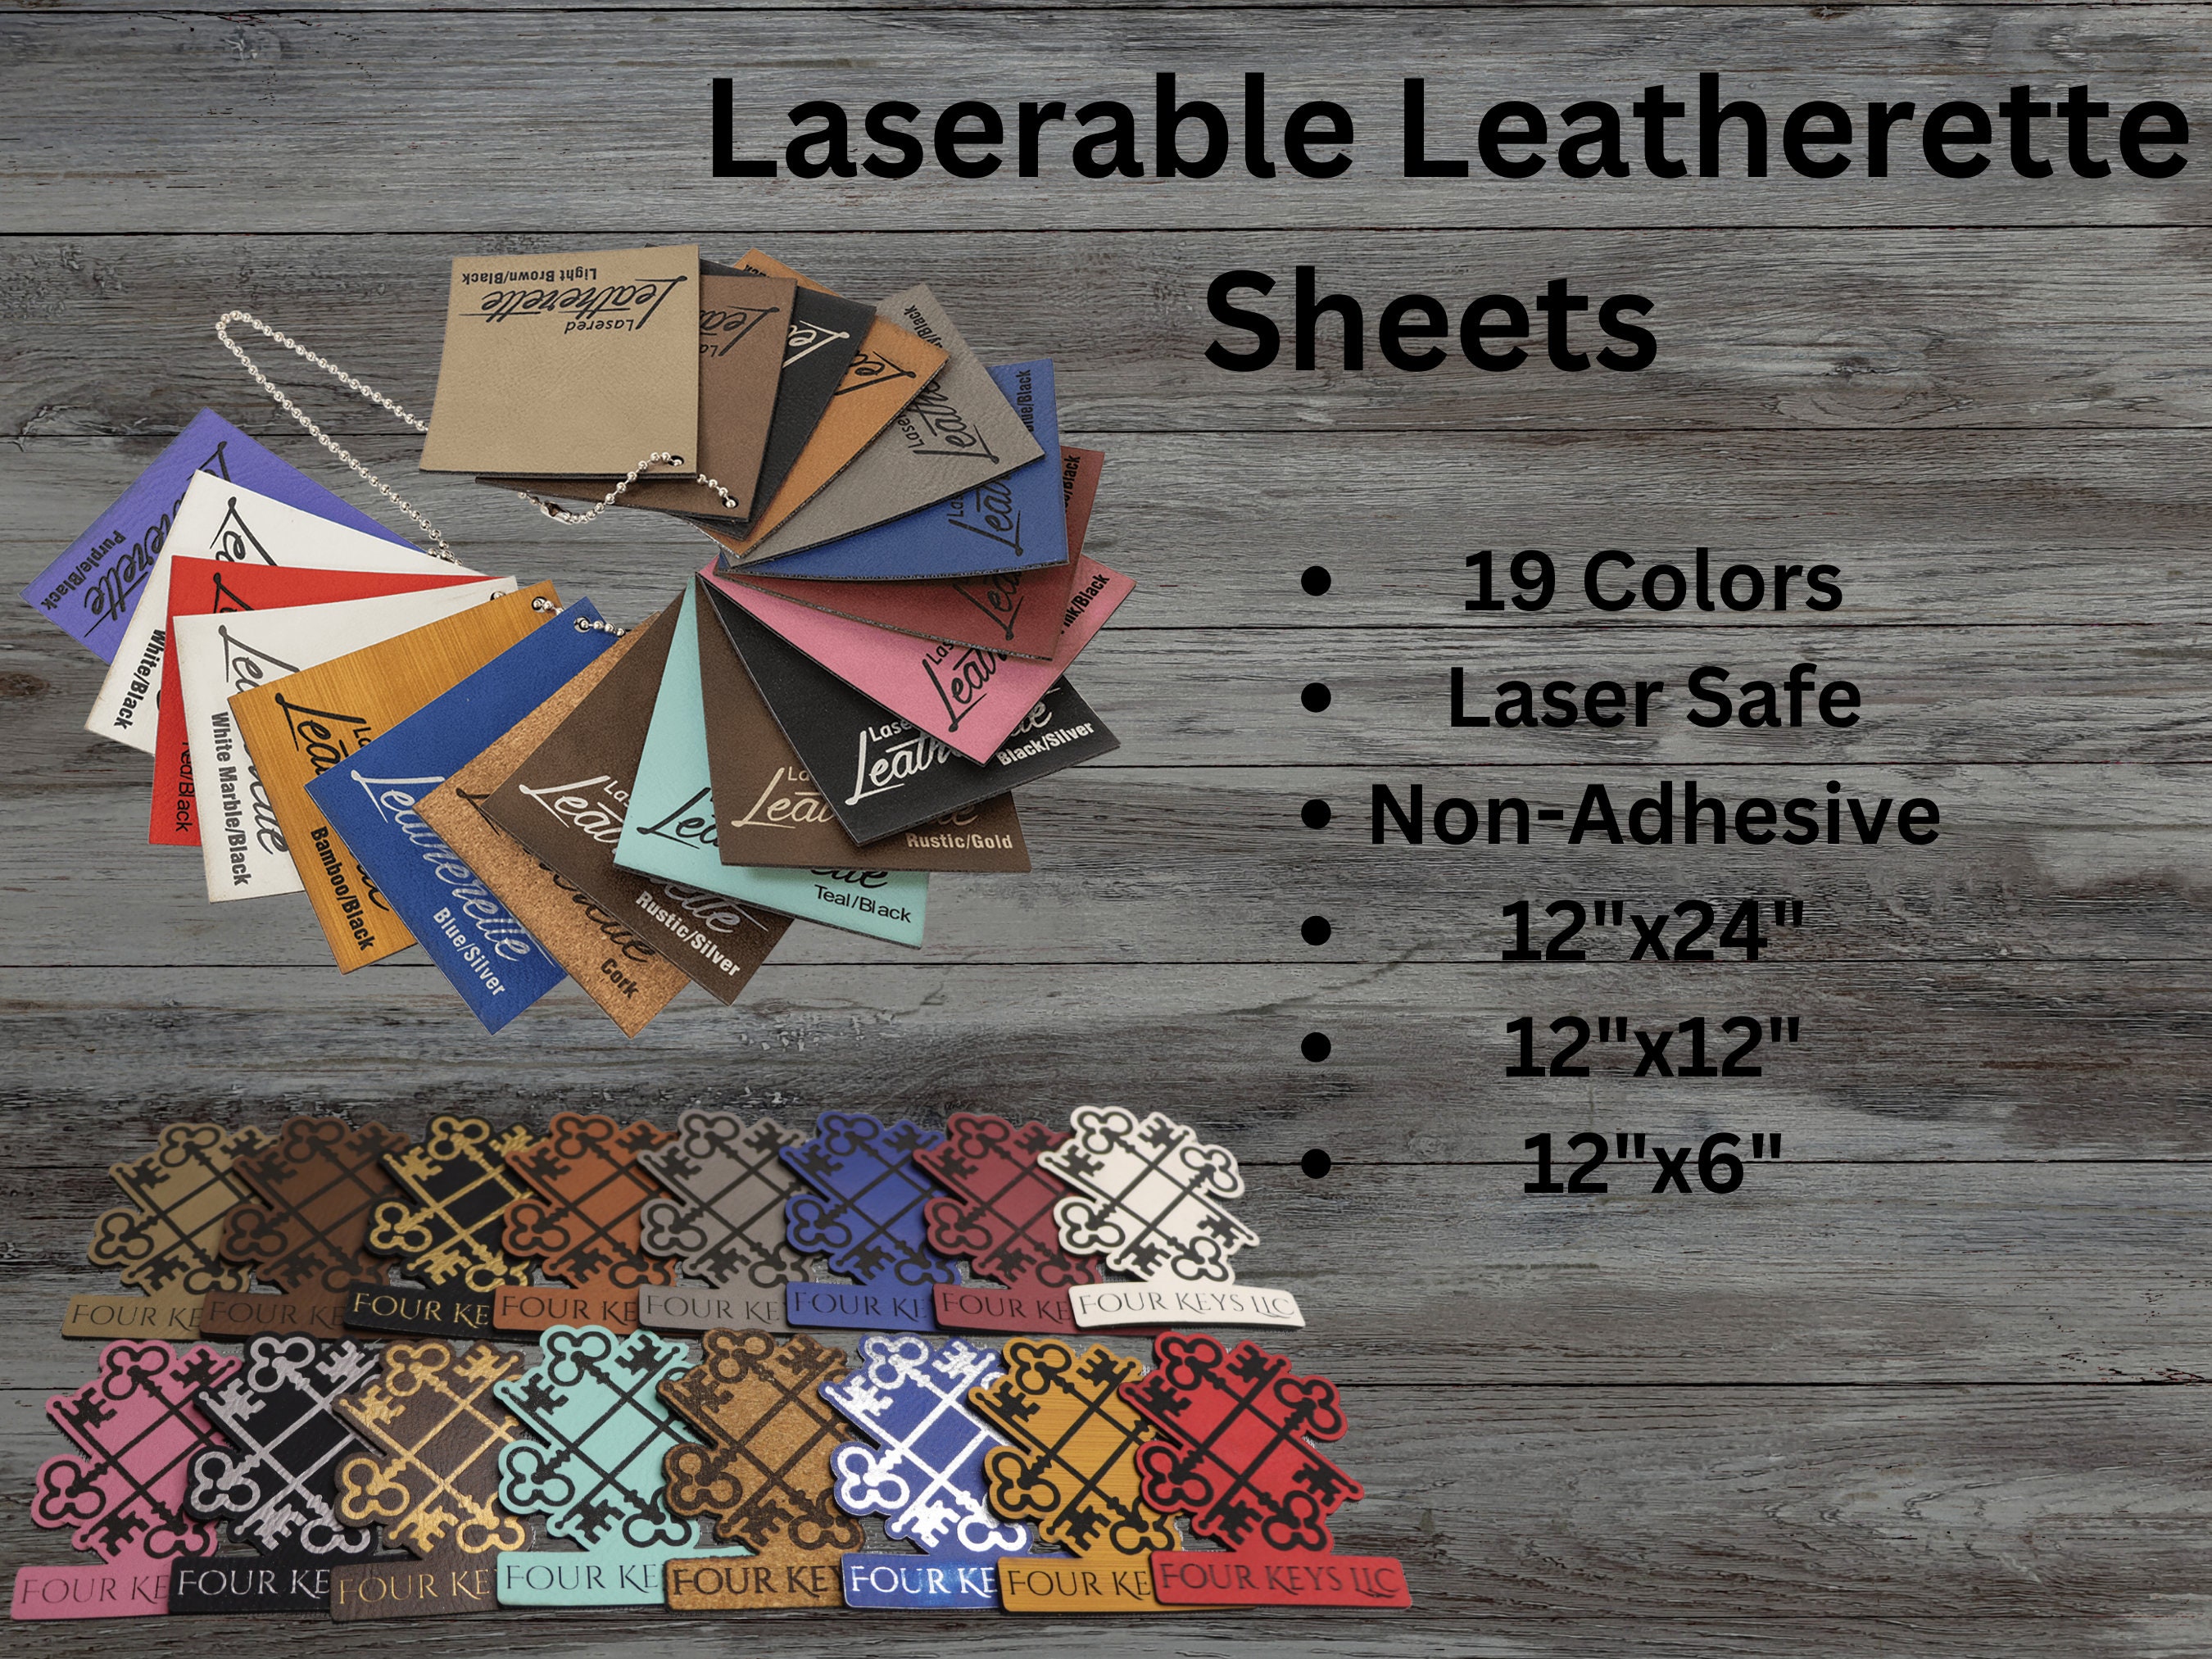 Leather Sheets for Laser Engraving, Laserable Leatherette 12 X 24